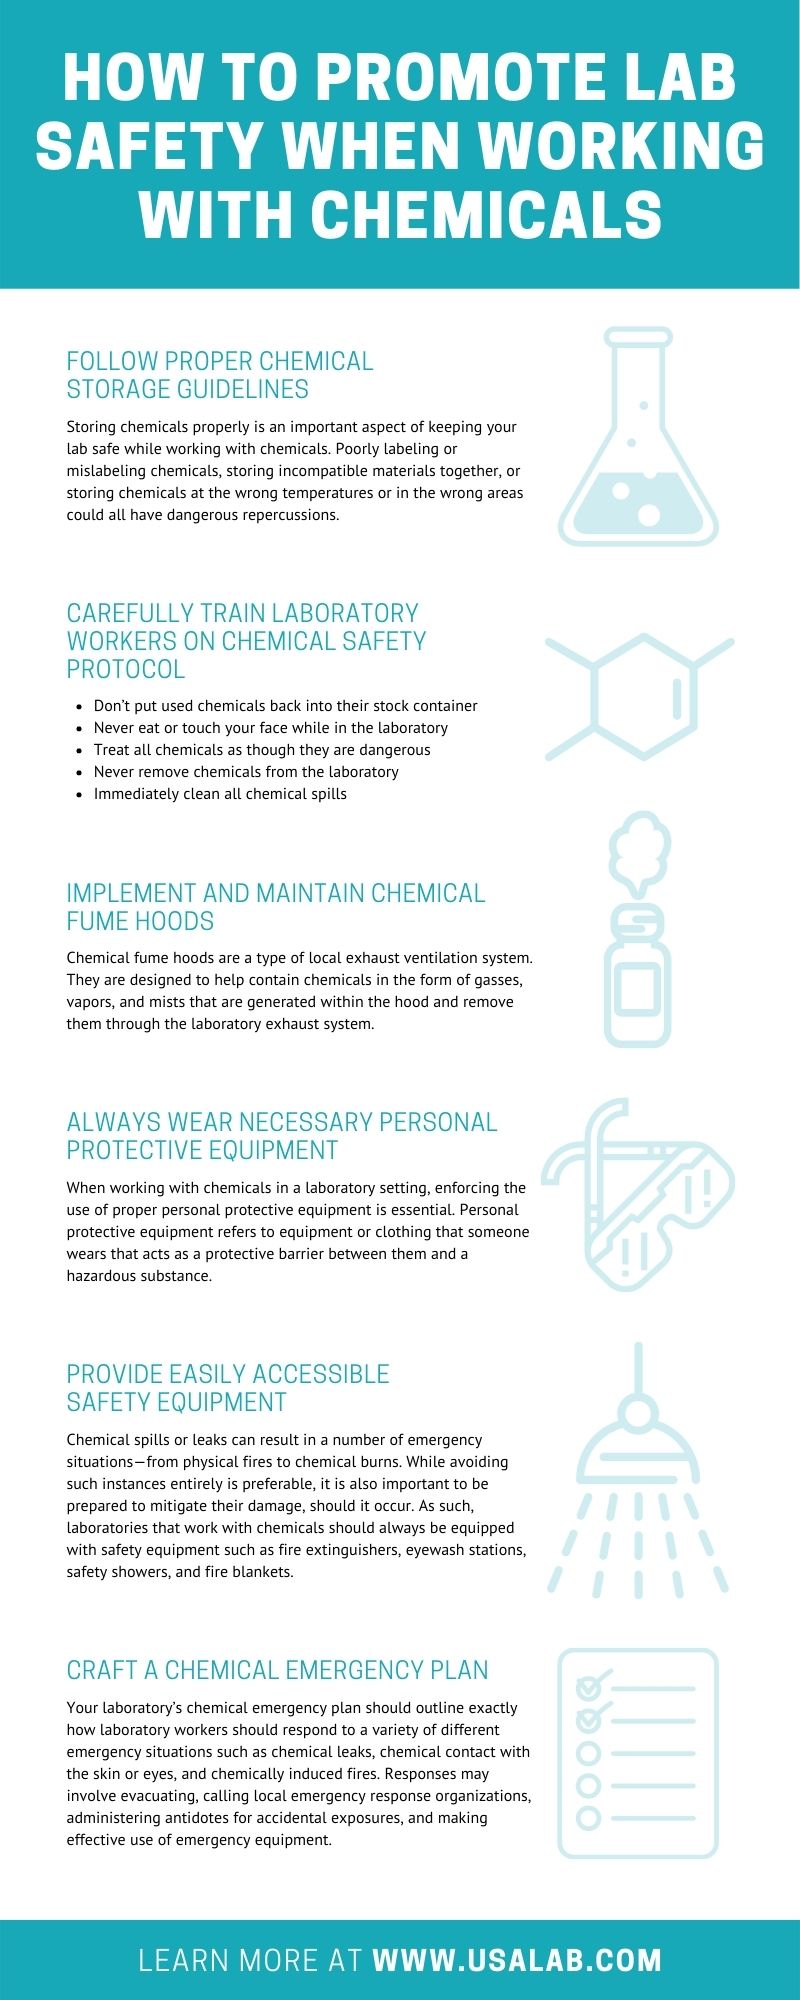 Lab Safety When Working with Chemicals   